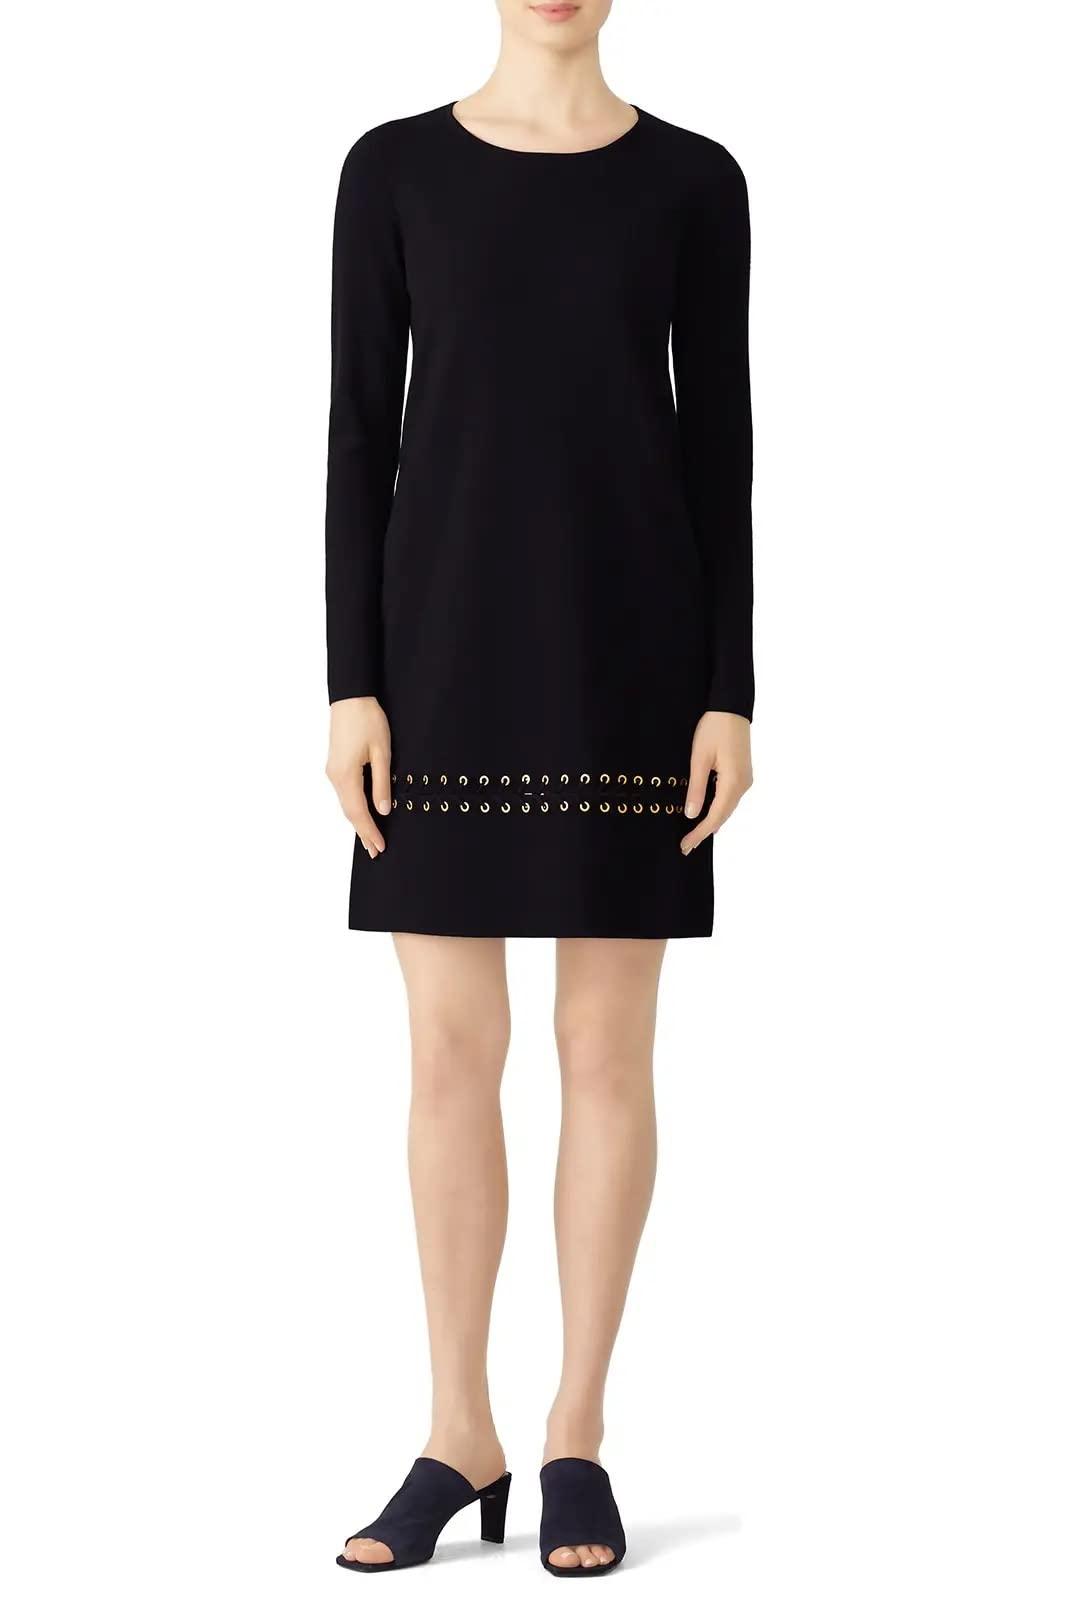 Tory Burch Rent The Runway Pre-loved Harley Sweater Dress in Black | Lyst